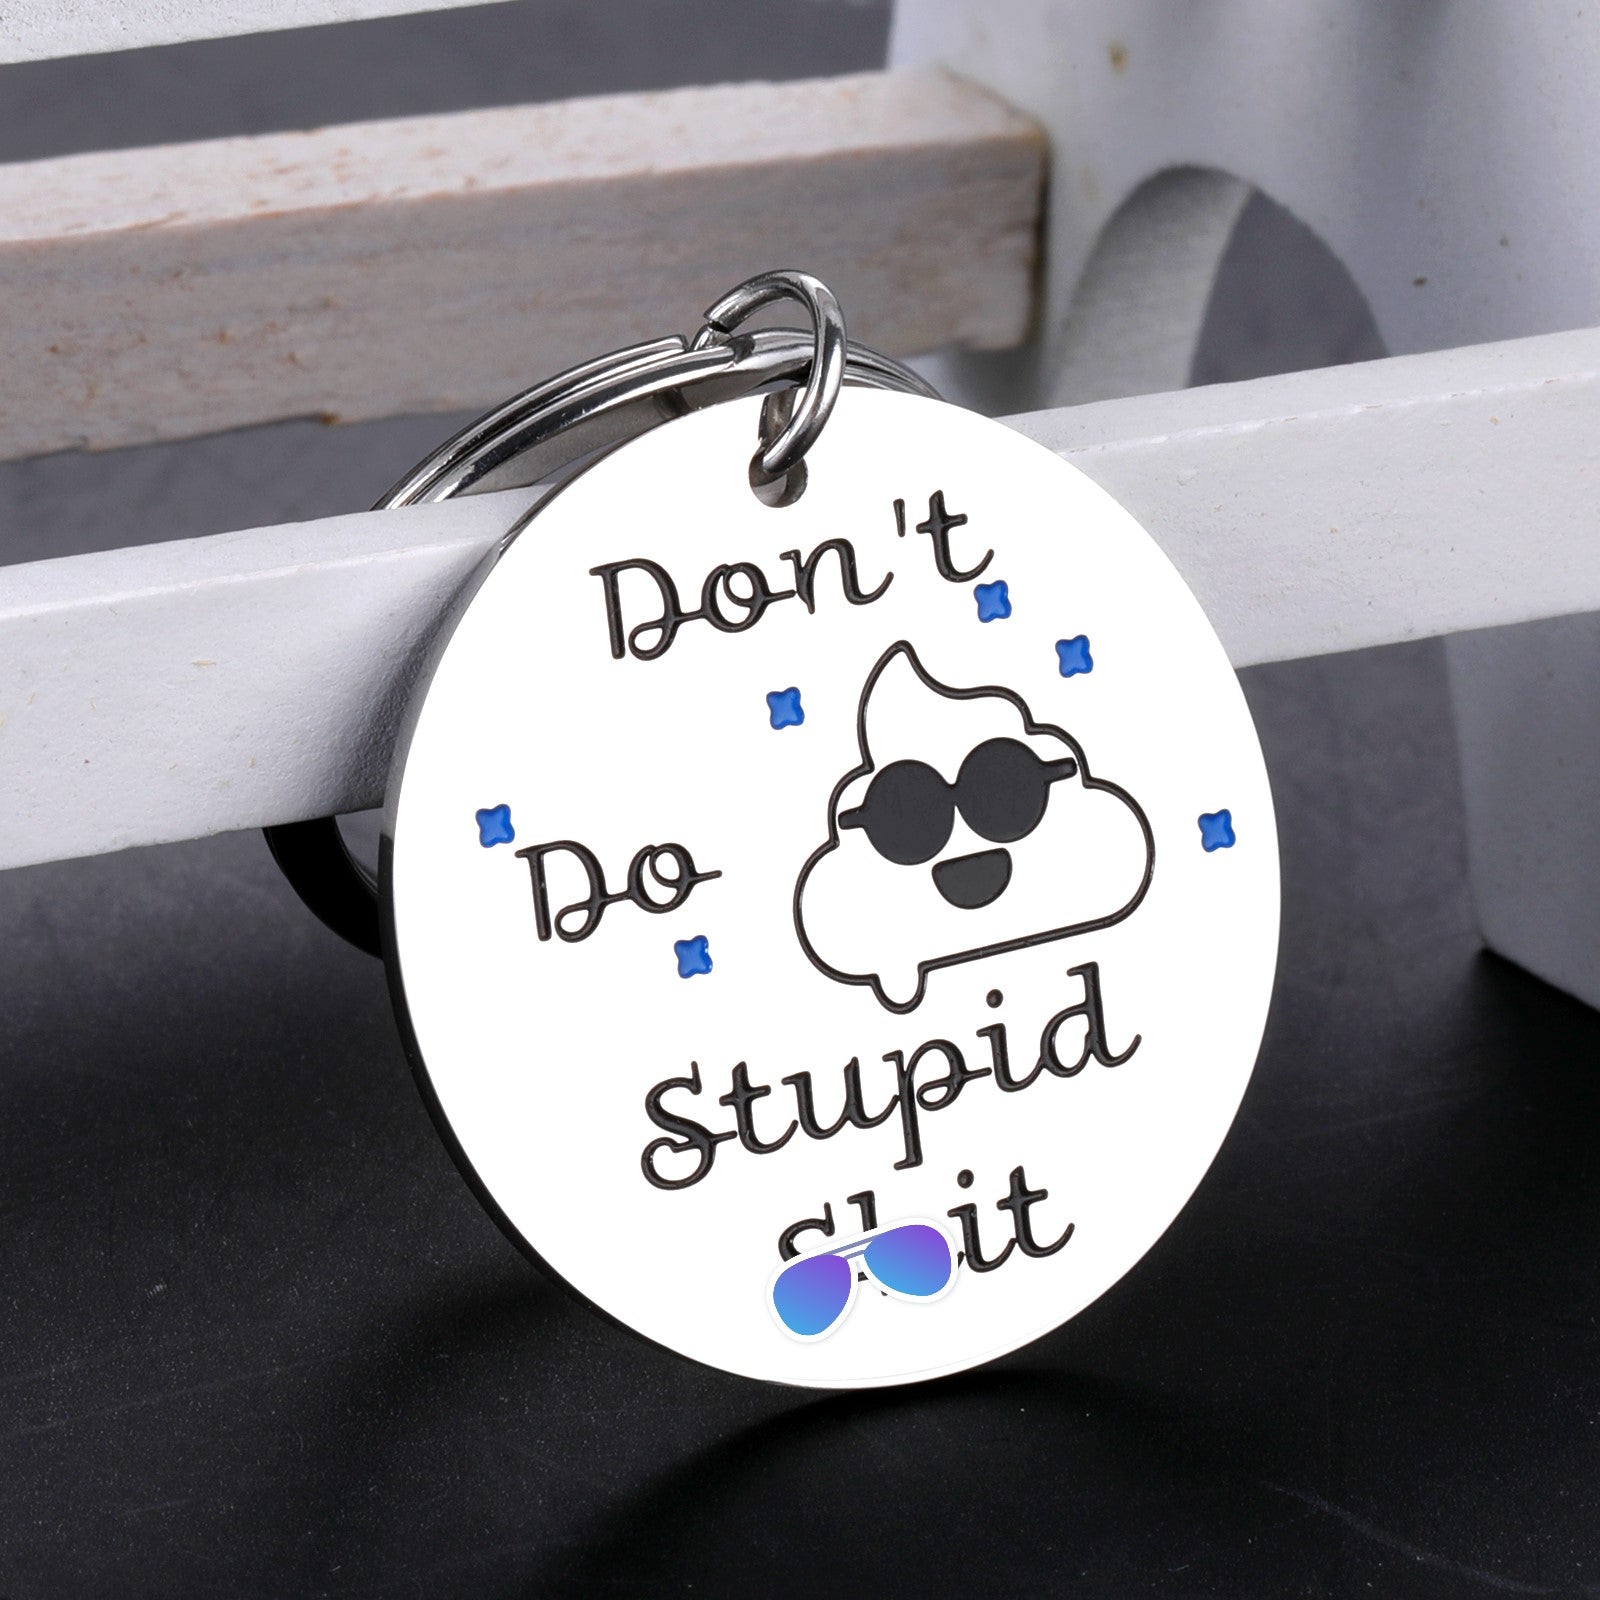 Son Gifts from Mom Don't Do Stupid St Keychain Gifts to Daughter Birthday  Christmas Valentine's Day Gifts for Teenagers Boys Girls Kids Funny